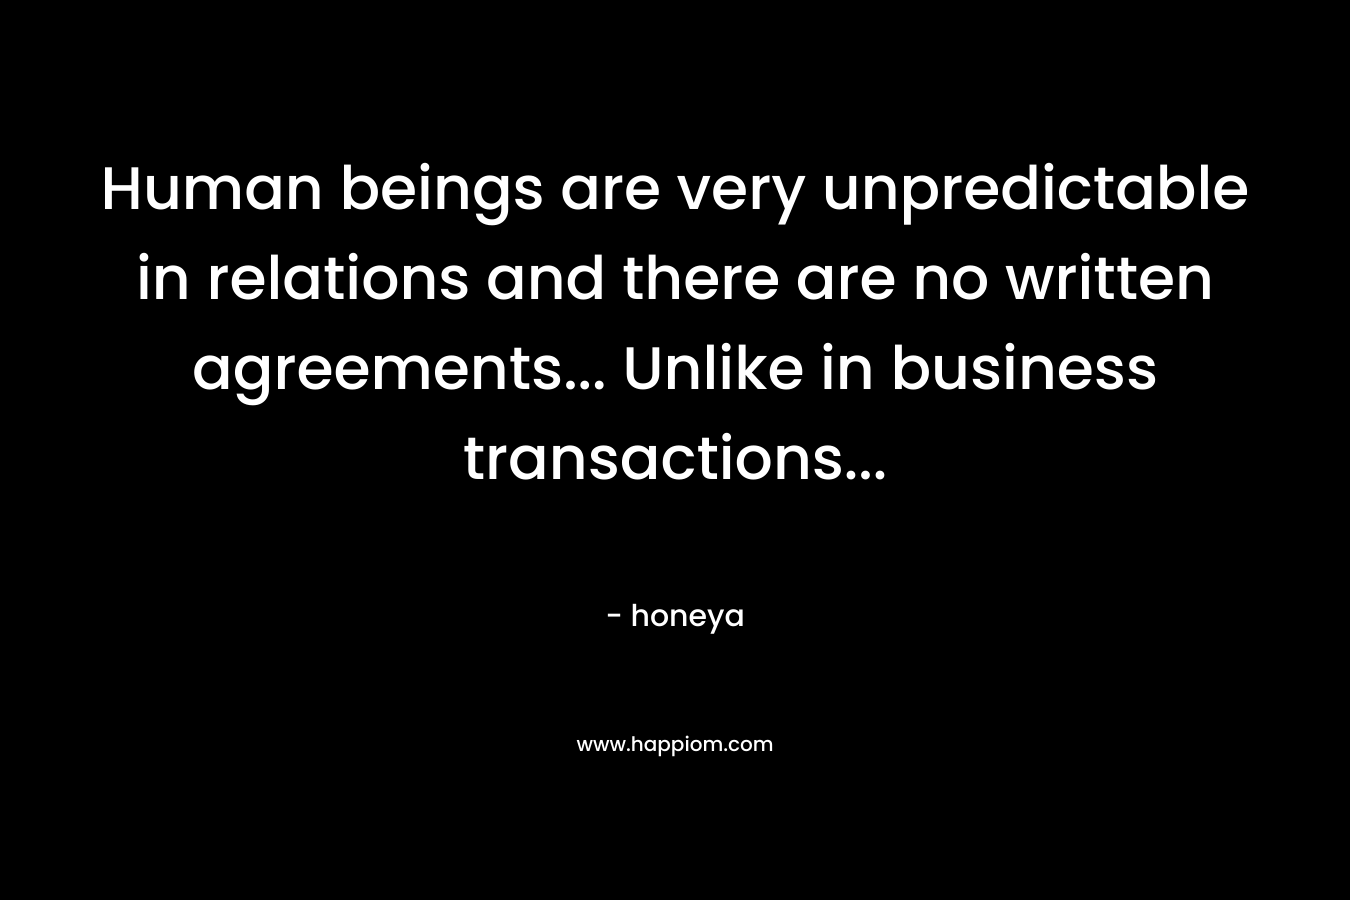 Human beings are very unpredictable in relations and there are no written agreements... Unlike in business transactions...